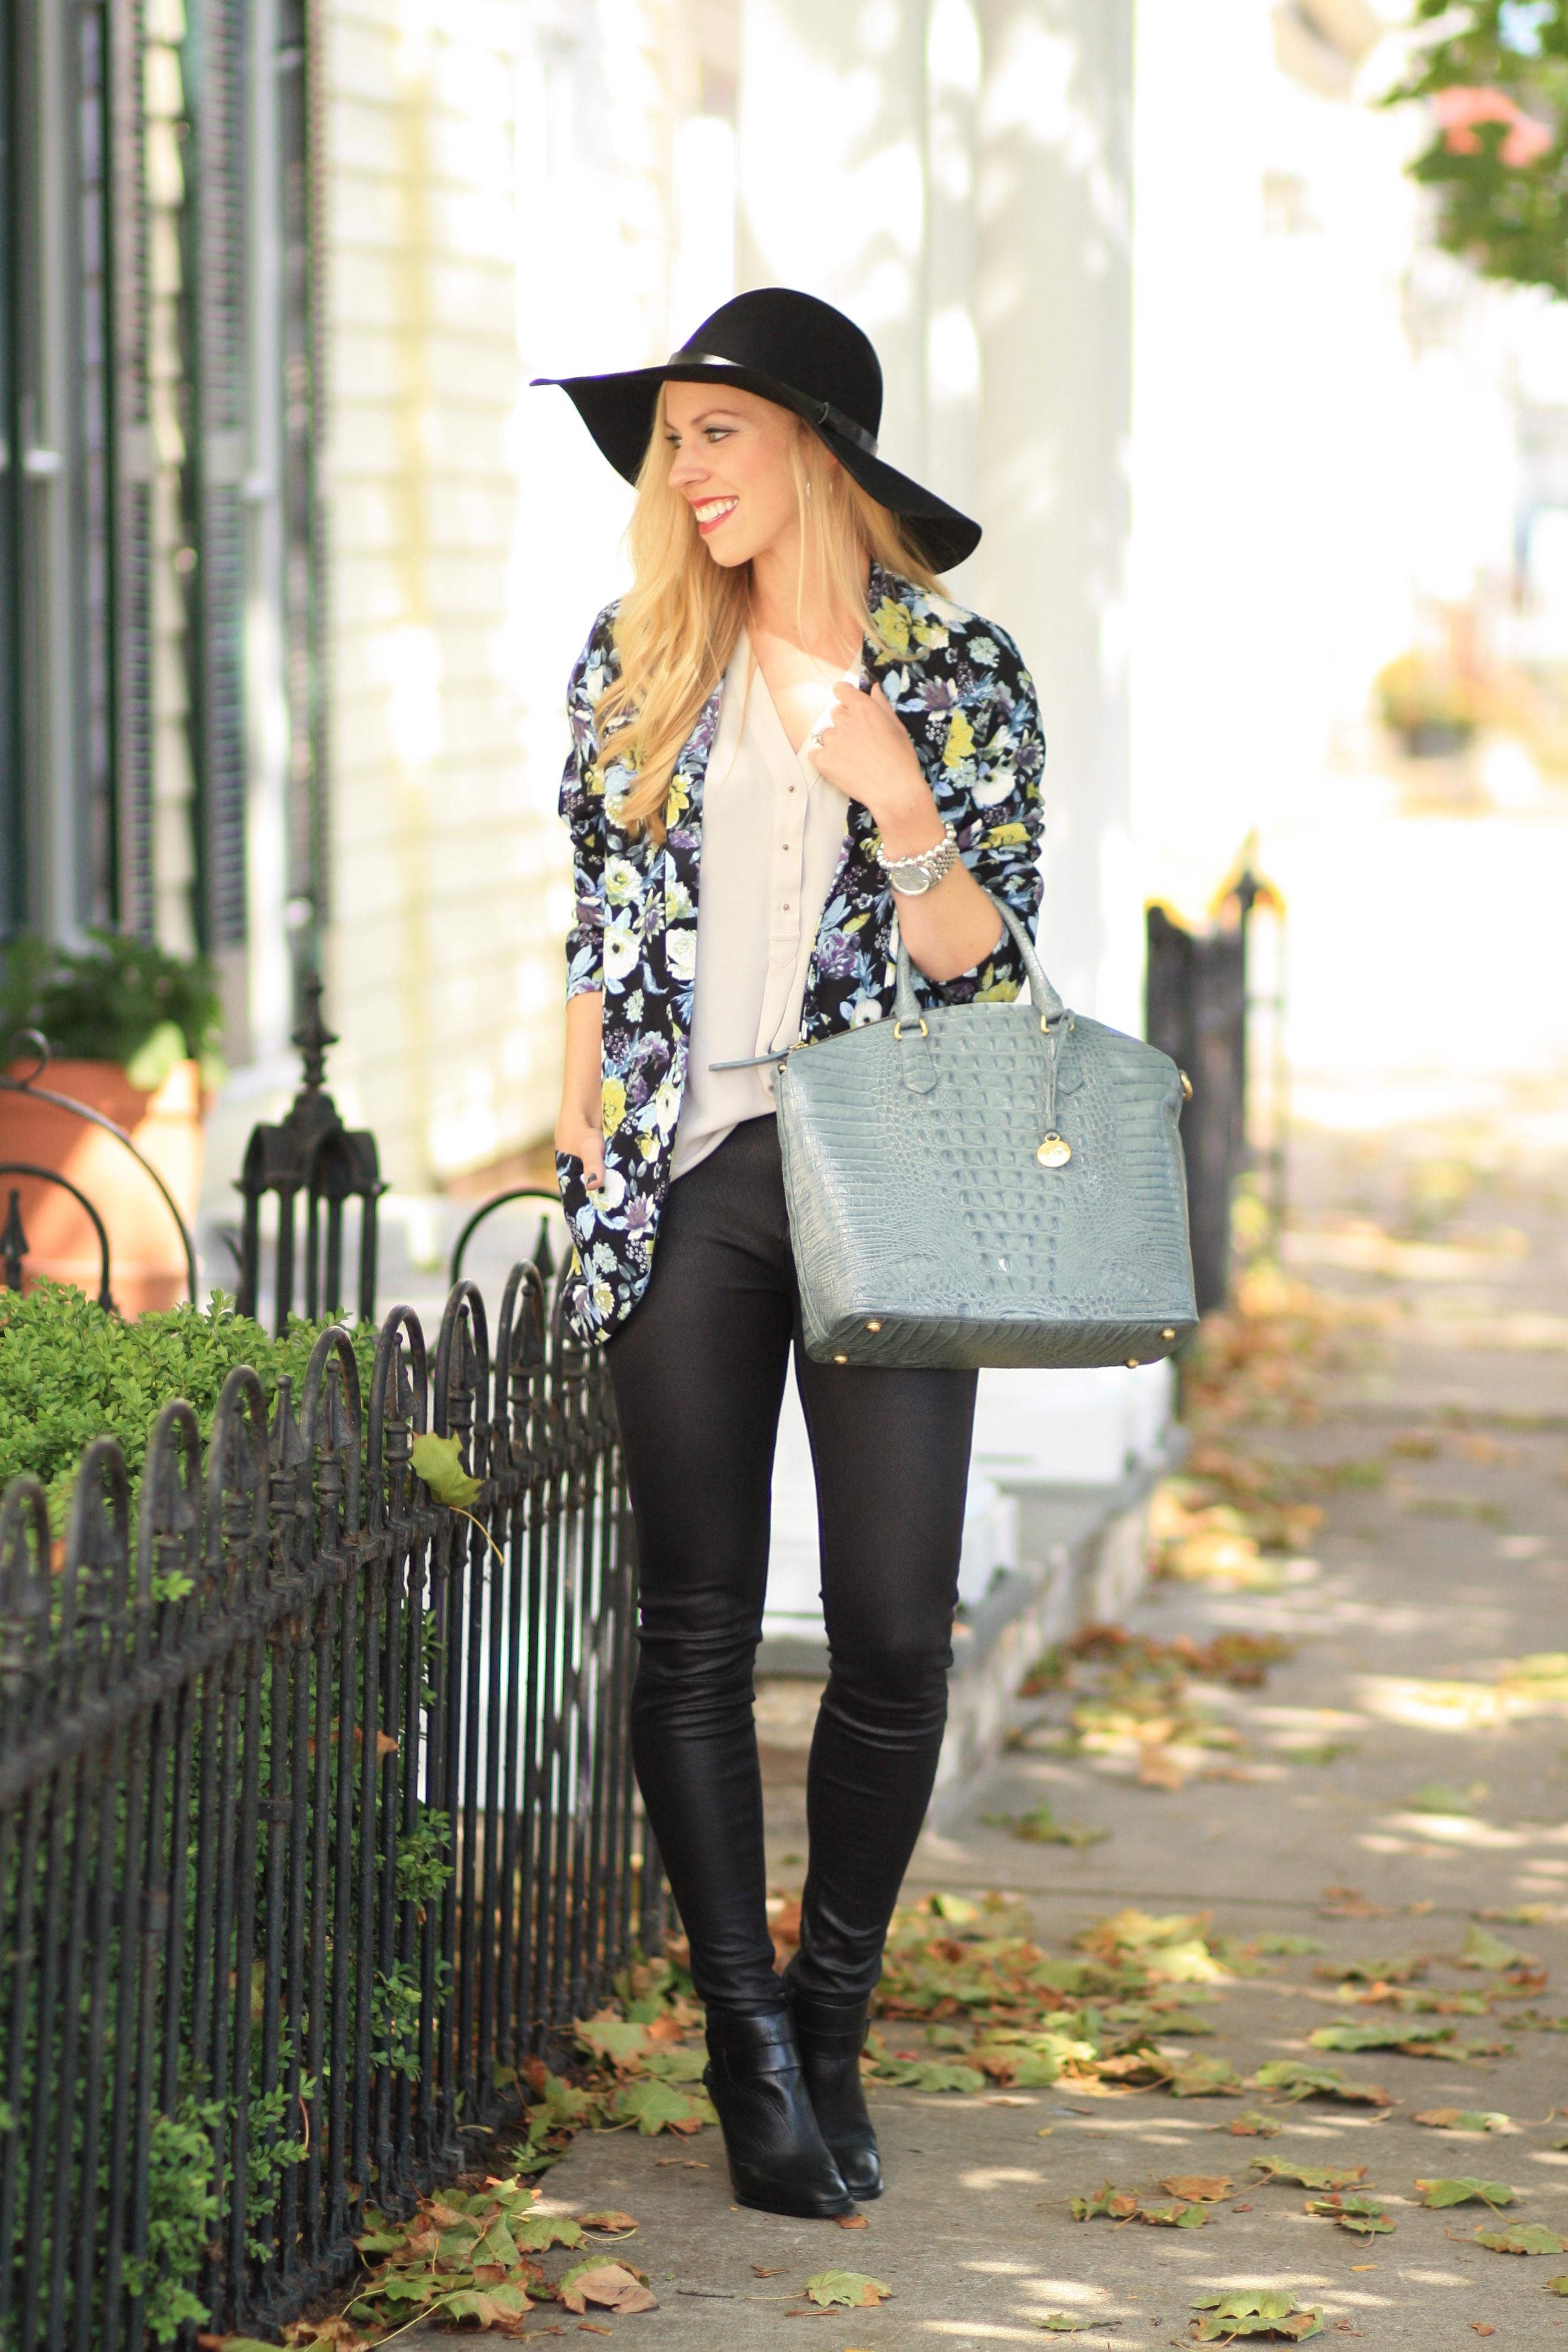 https://www.meagansmoda.com/wp-content/uploads/2014/10/HM-black-wool-floppy-hat-floral-kimono-fall-floral-print-7-for-all-mankind-leather-jeans-black-ankle-boots-with-leather-leggings-Brahmin-Jasper-Duxbury-satchel.jpg